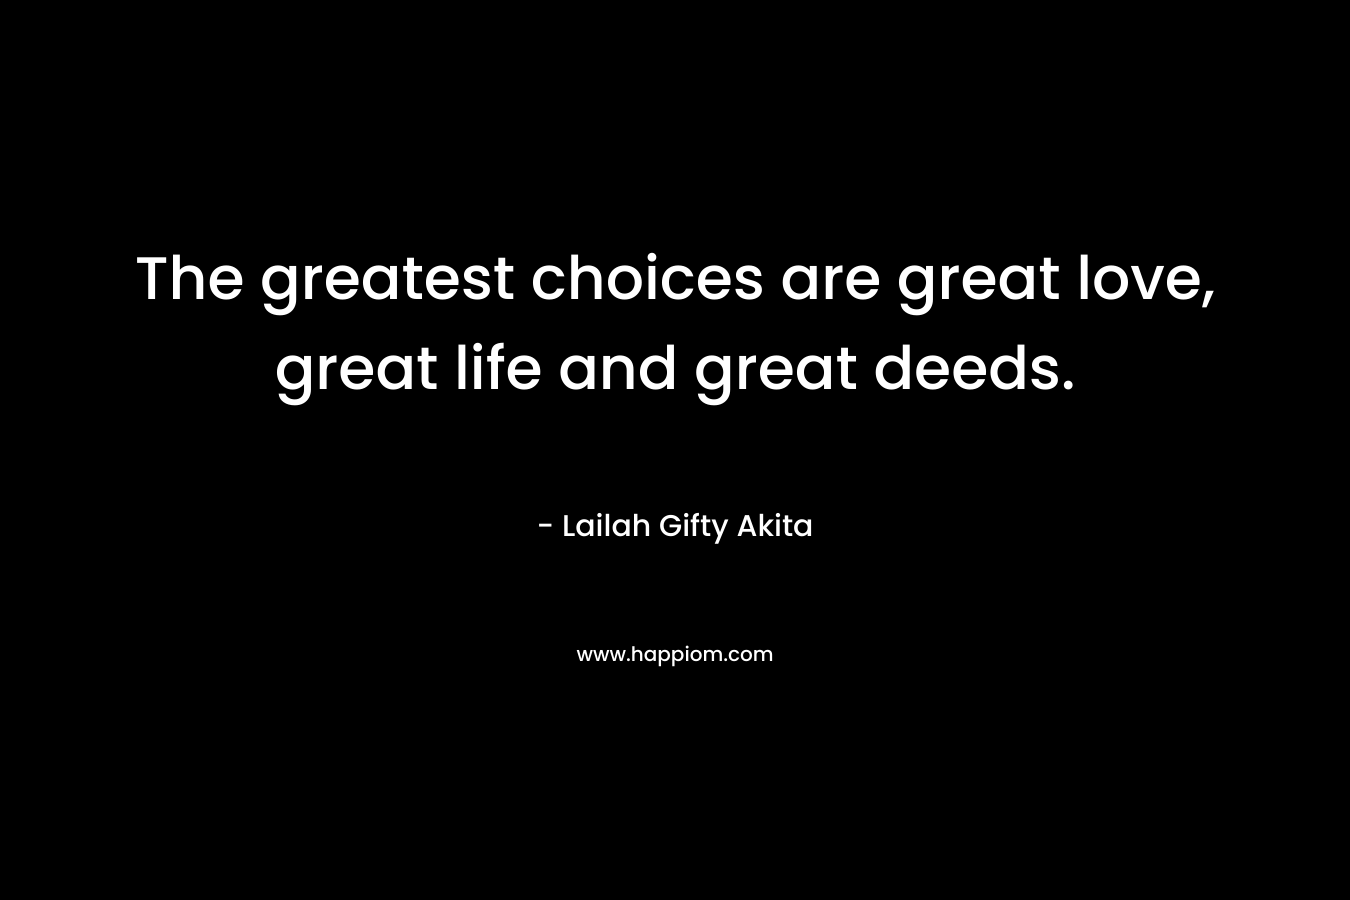 The greatest choices are great love, great life and great deeds.